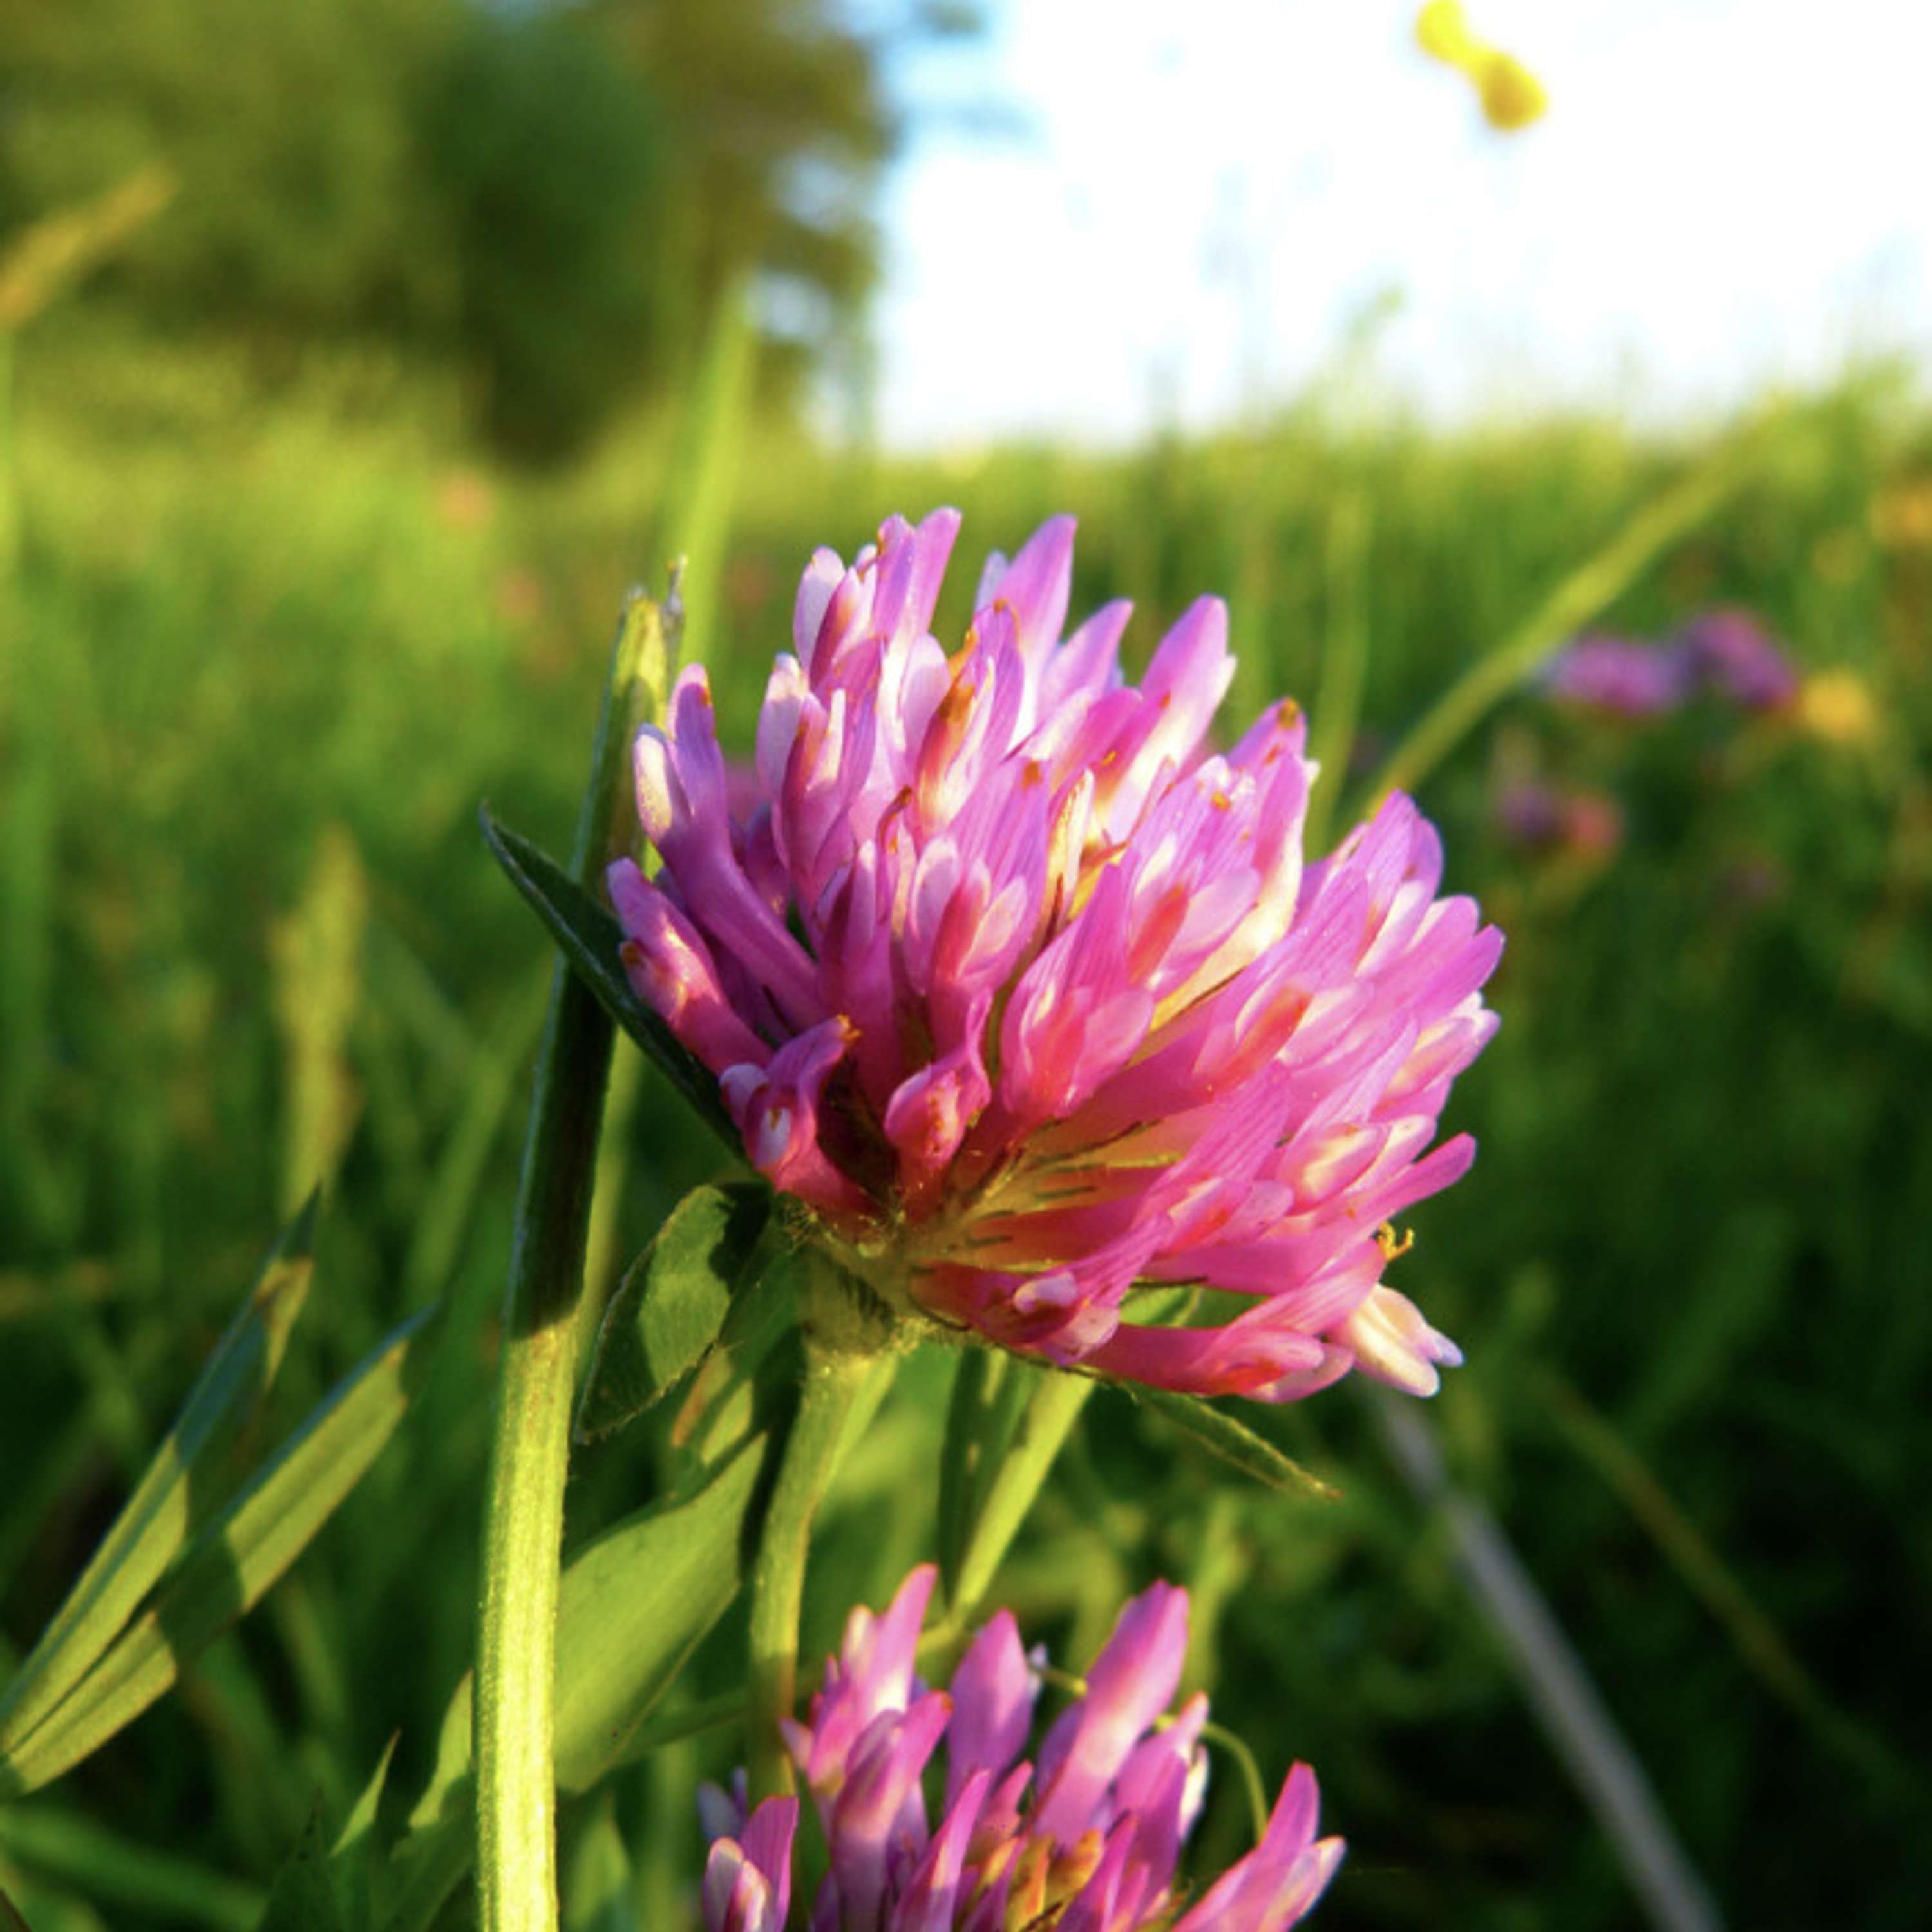 Has red clover a role in your beef production system?